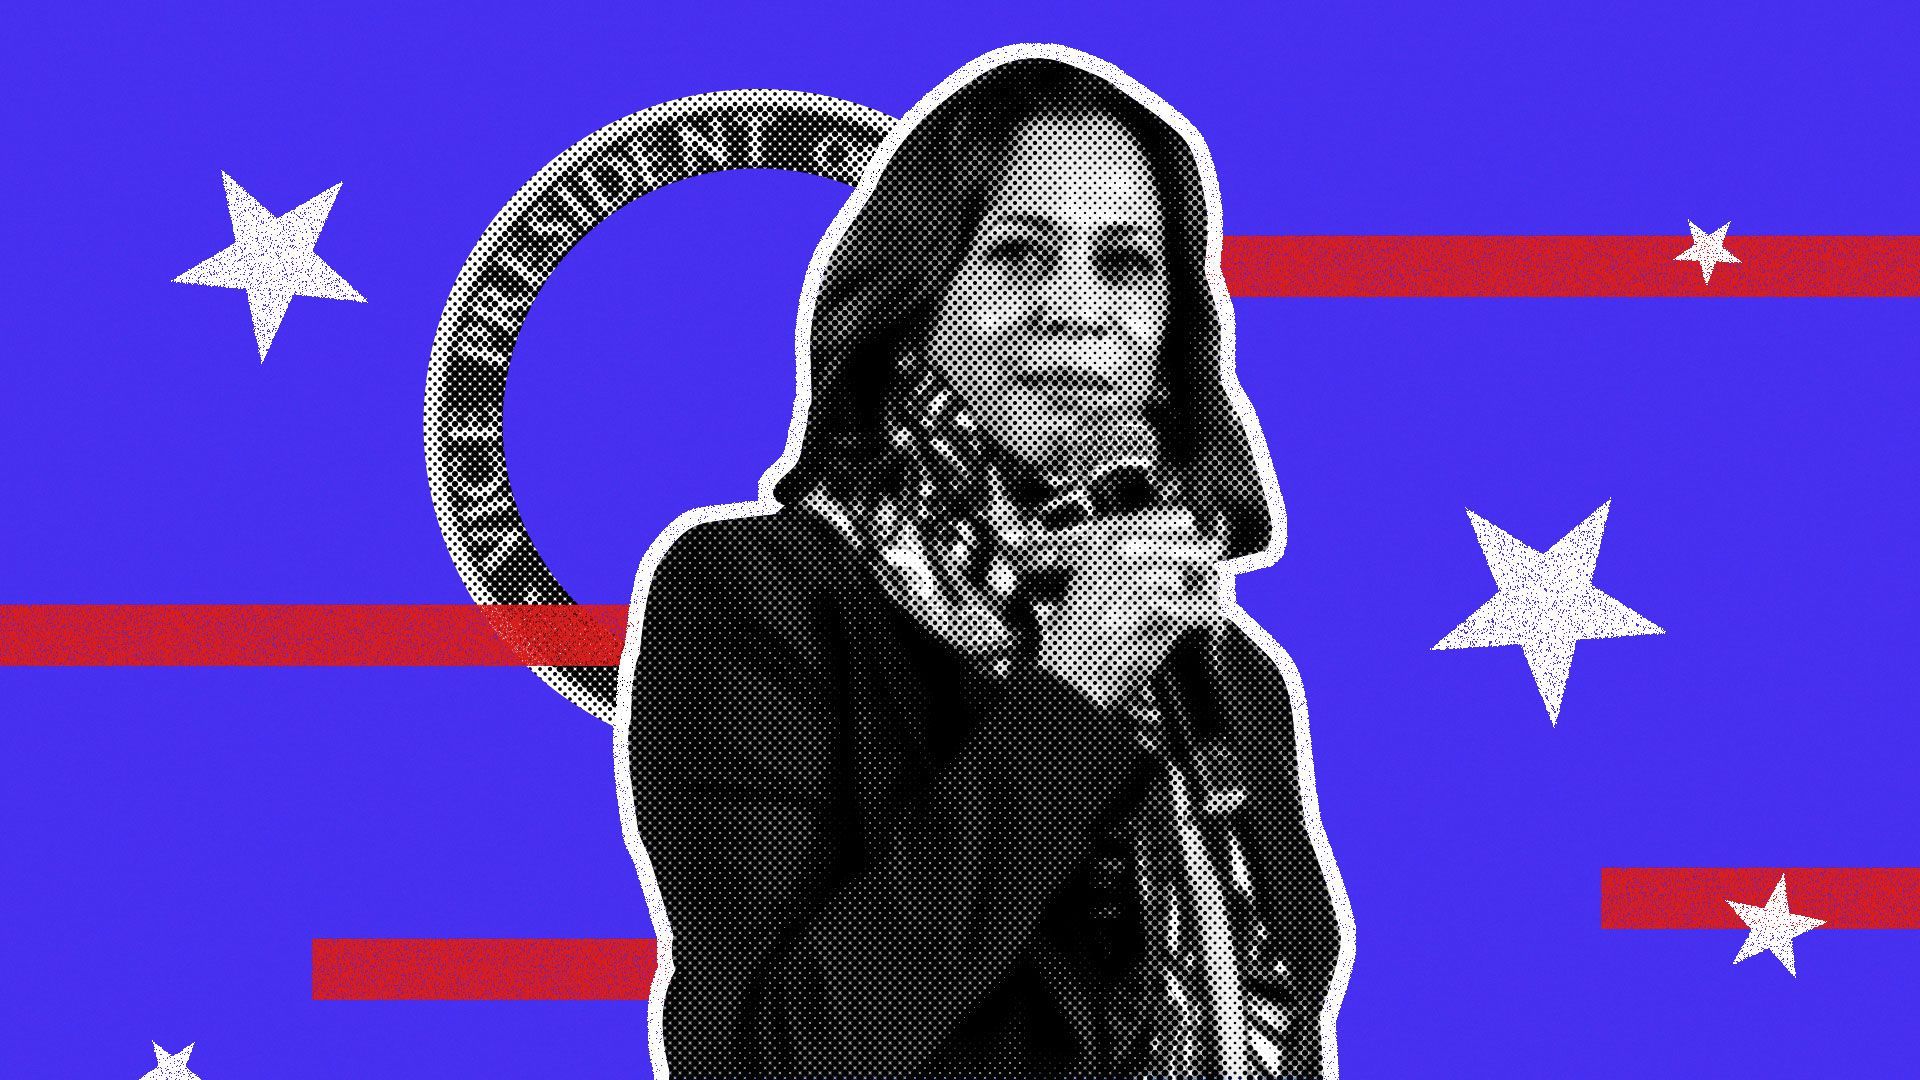 Photo illustration of Kamala Harris with a vice presidential seal, stars, and stripes